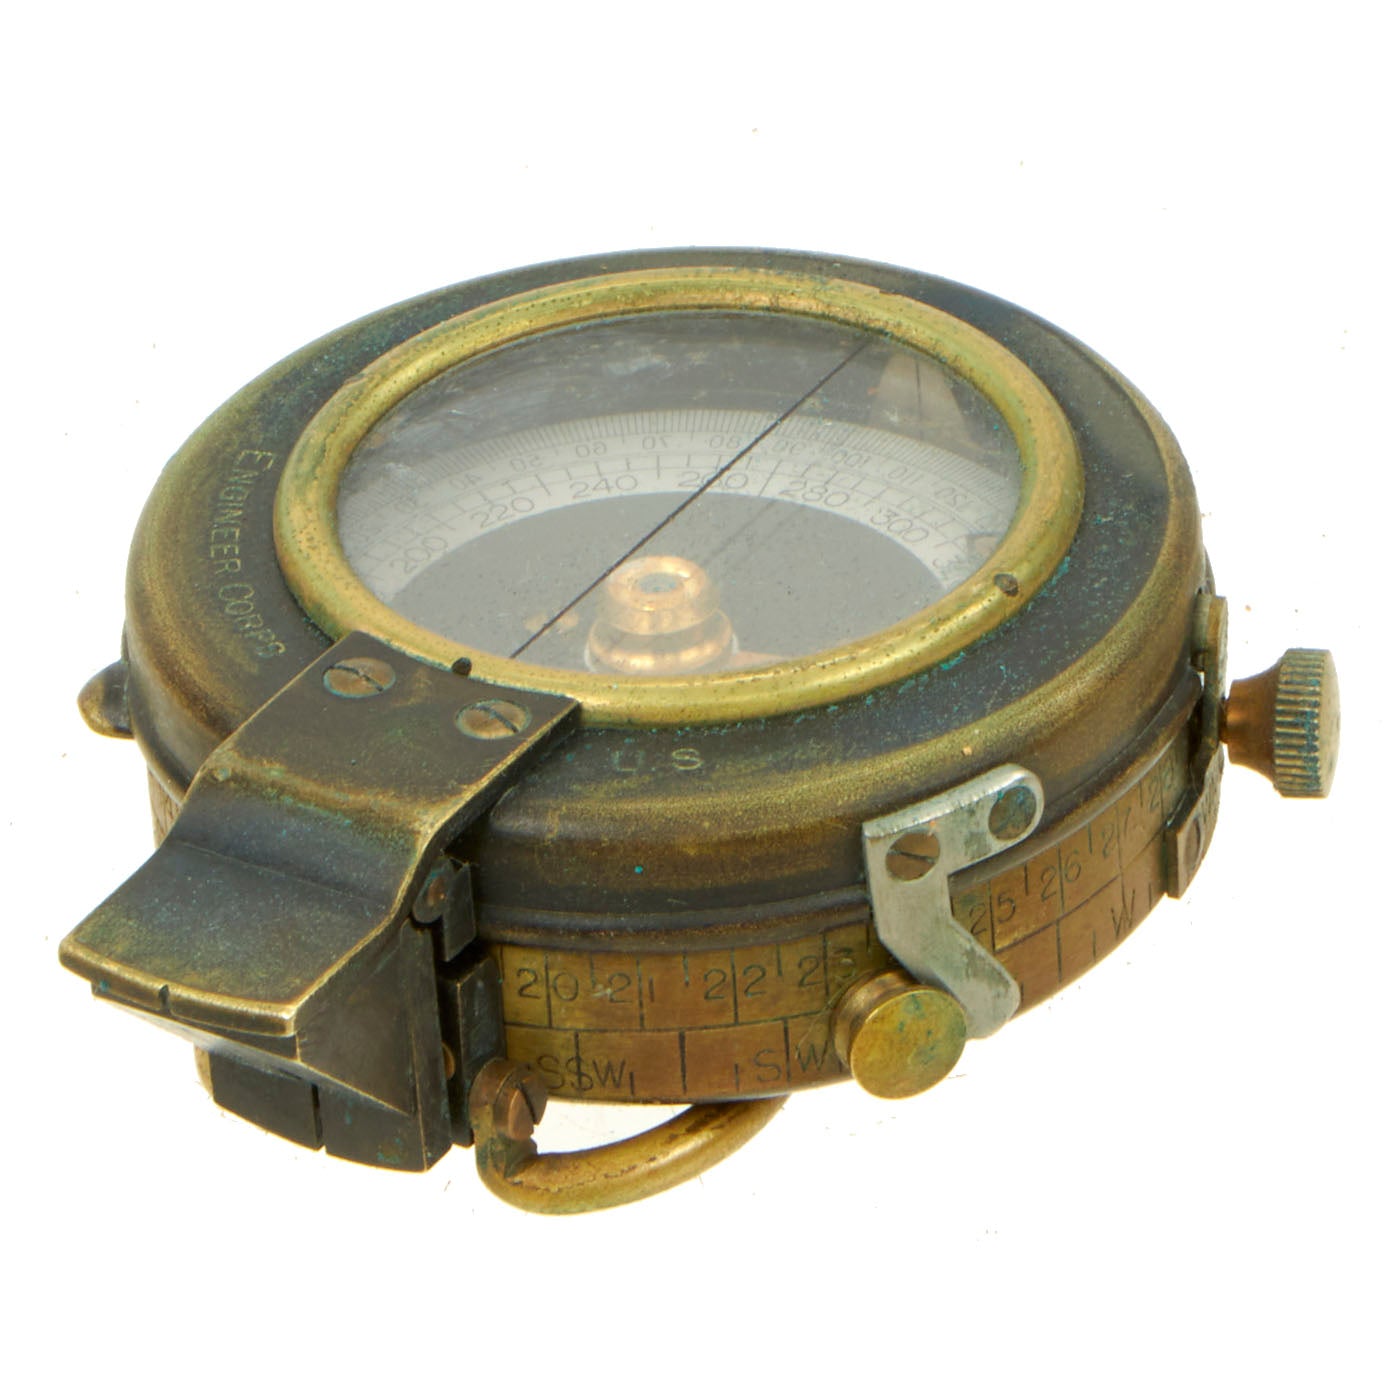 MILITARY COMPASS ENGINEERING COMPASS PRISMATIC COMPASS BRASS VINTAGE COMPASS